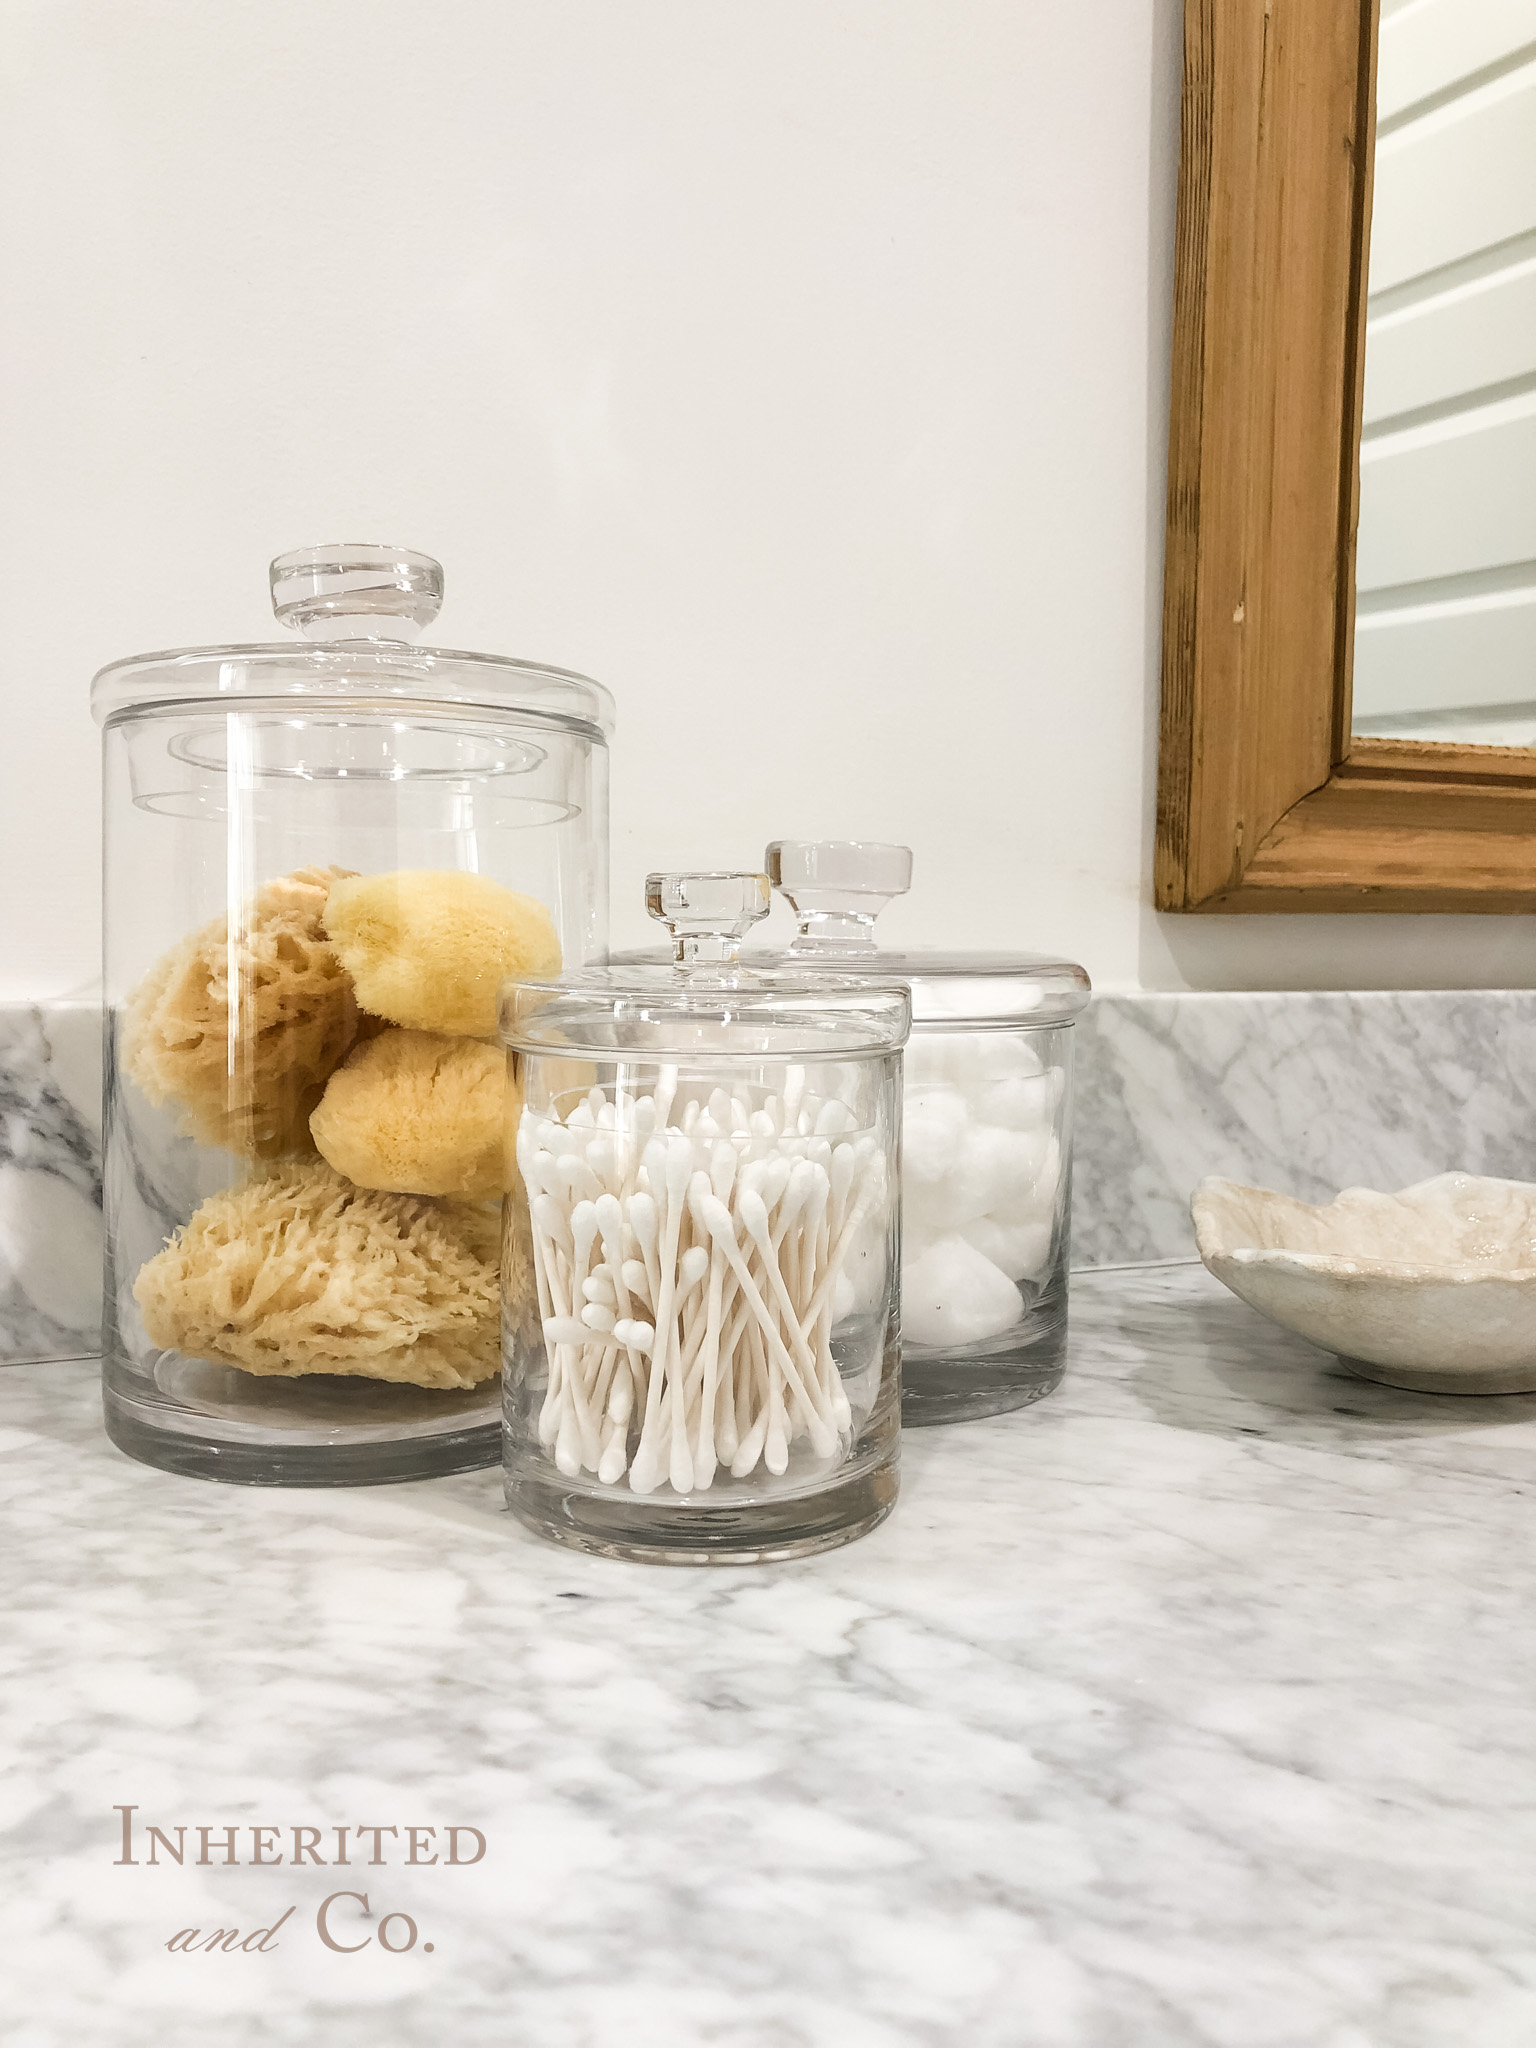 Glass Canisters with sponges, q-tips, and cotton balls on a bathroom countertop